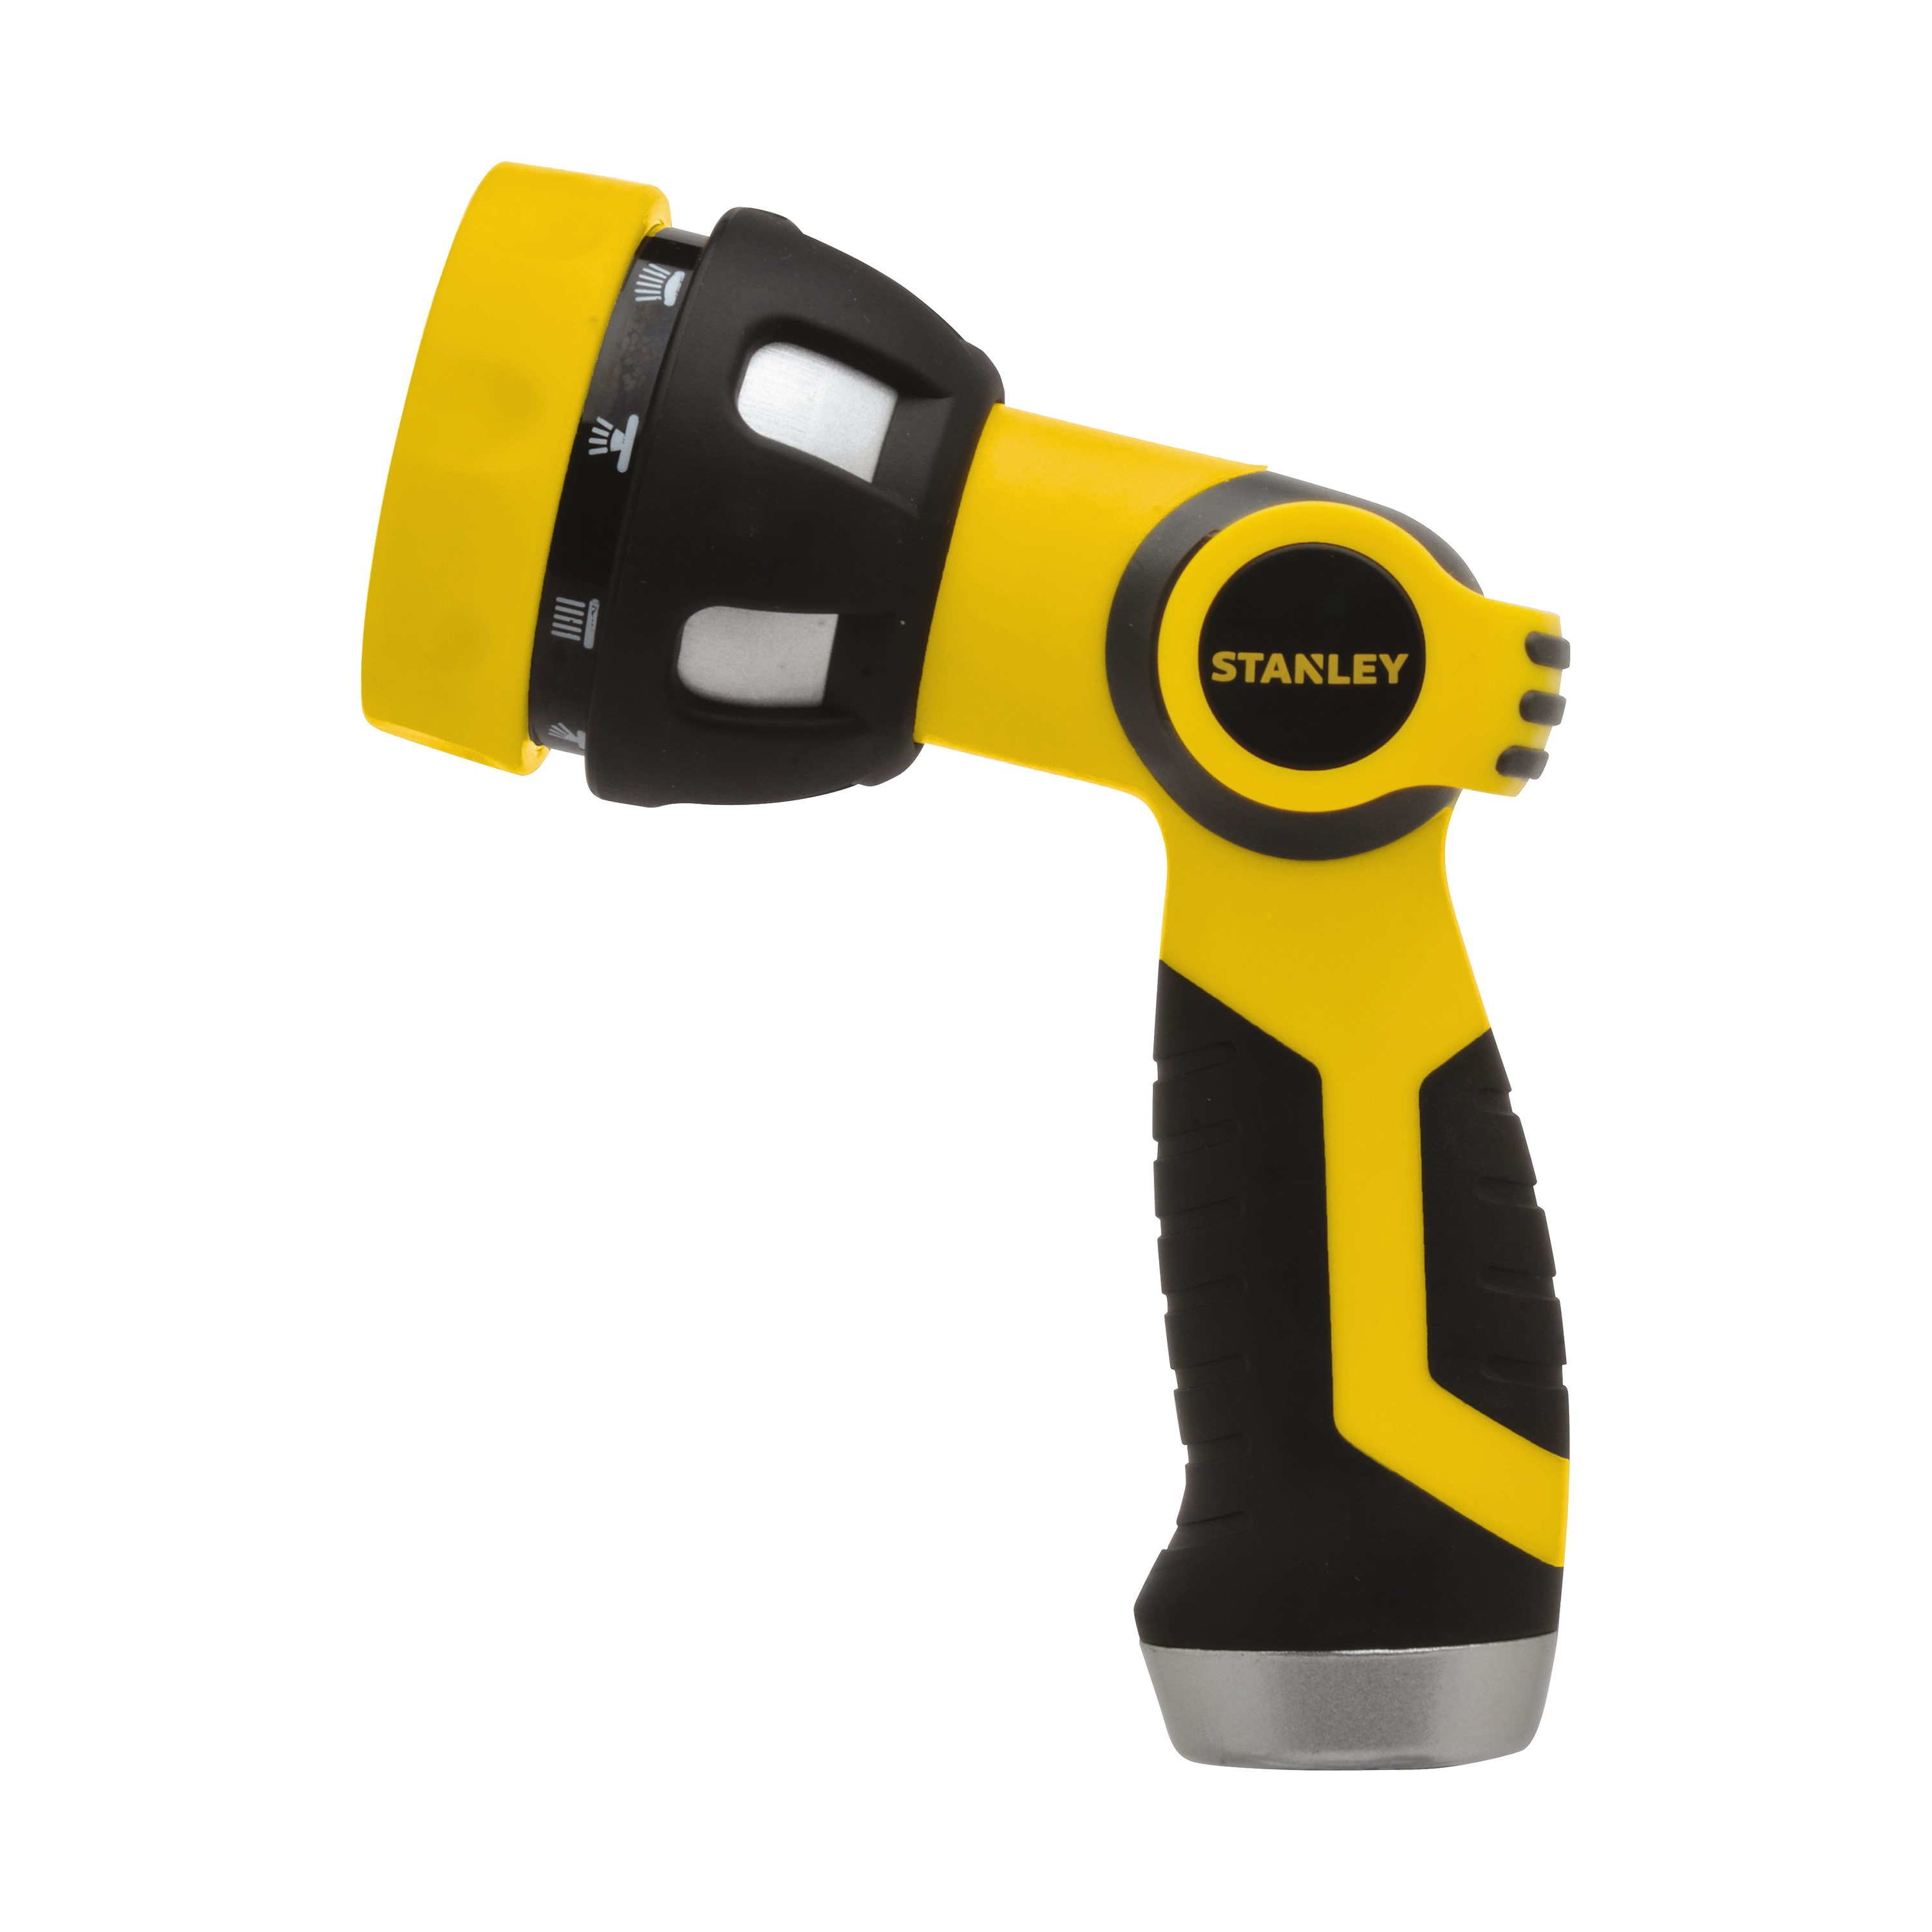 Stanley Tools - Accuscape PROSeries 9 Pattern Ergonomic Spray Nozzle - BDS6705